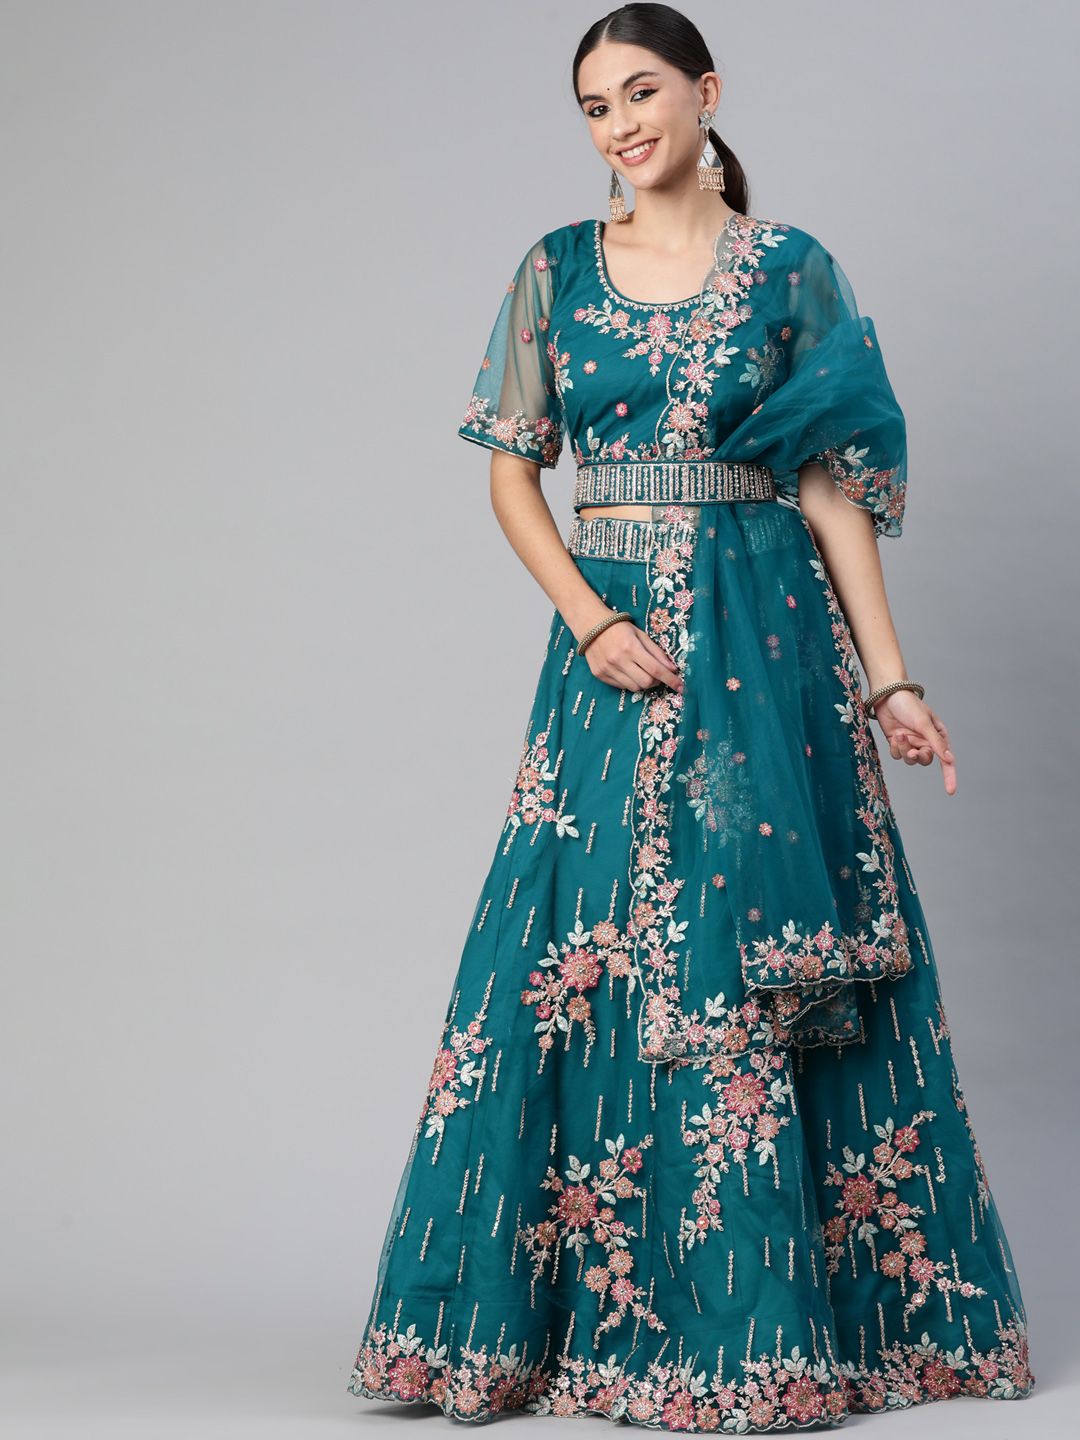 Readiprint Fashions Teal Blue & Pink Embroidered Unstitched Lehenga & Blouse With Dupatta Price in India